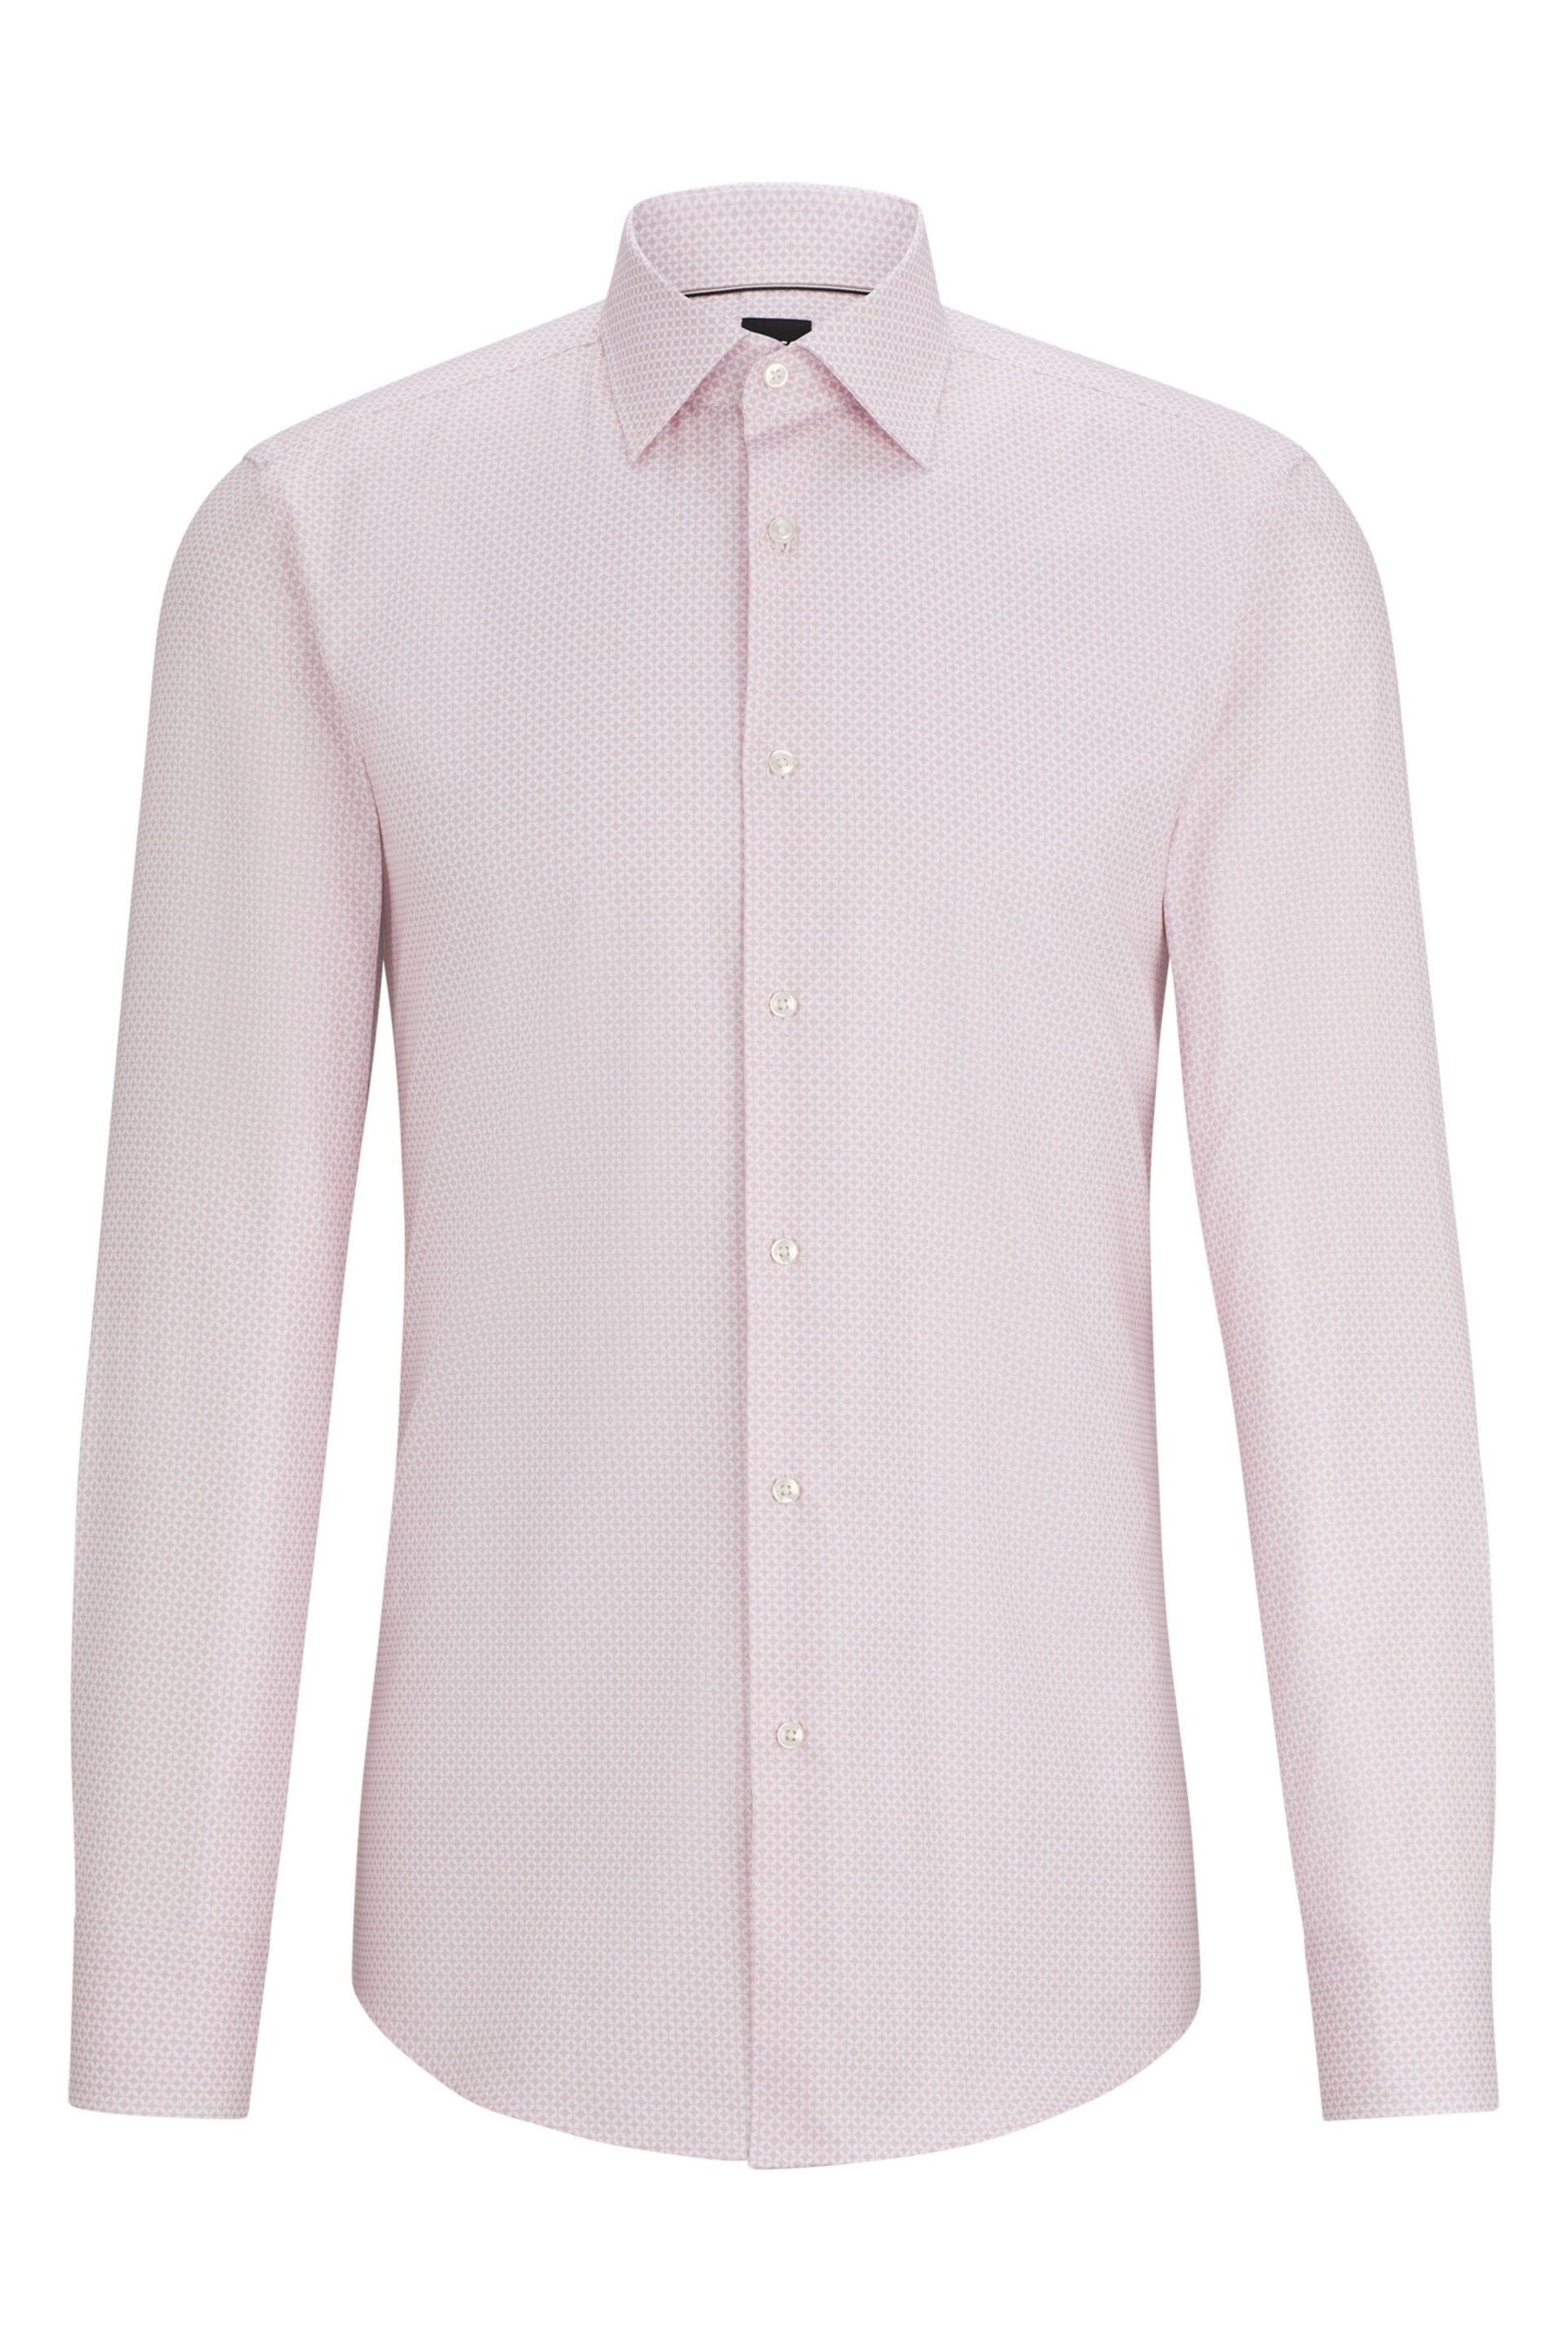 BOSS Pink Slim-Fit Shirt In Printed Stretch-Cotton Dobby - Image 6 of 6